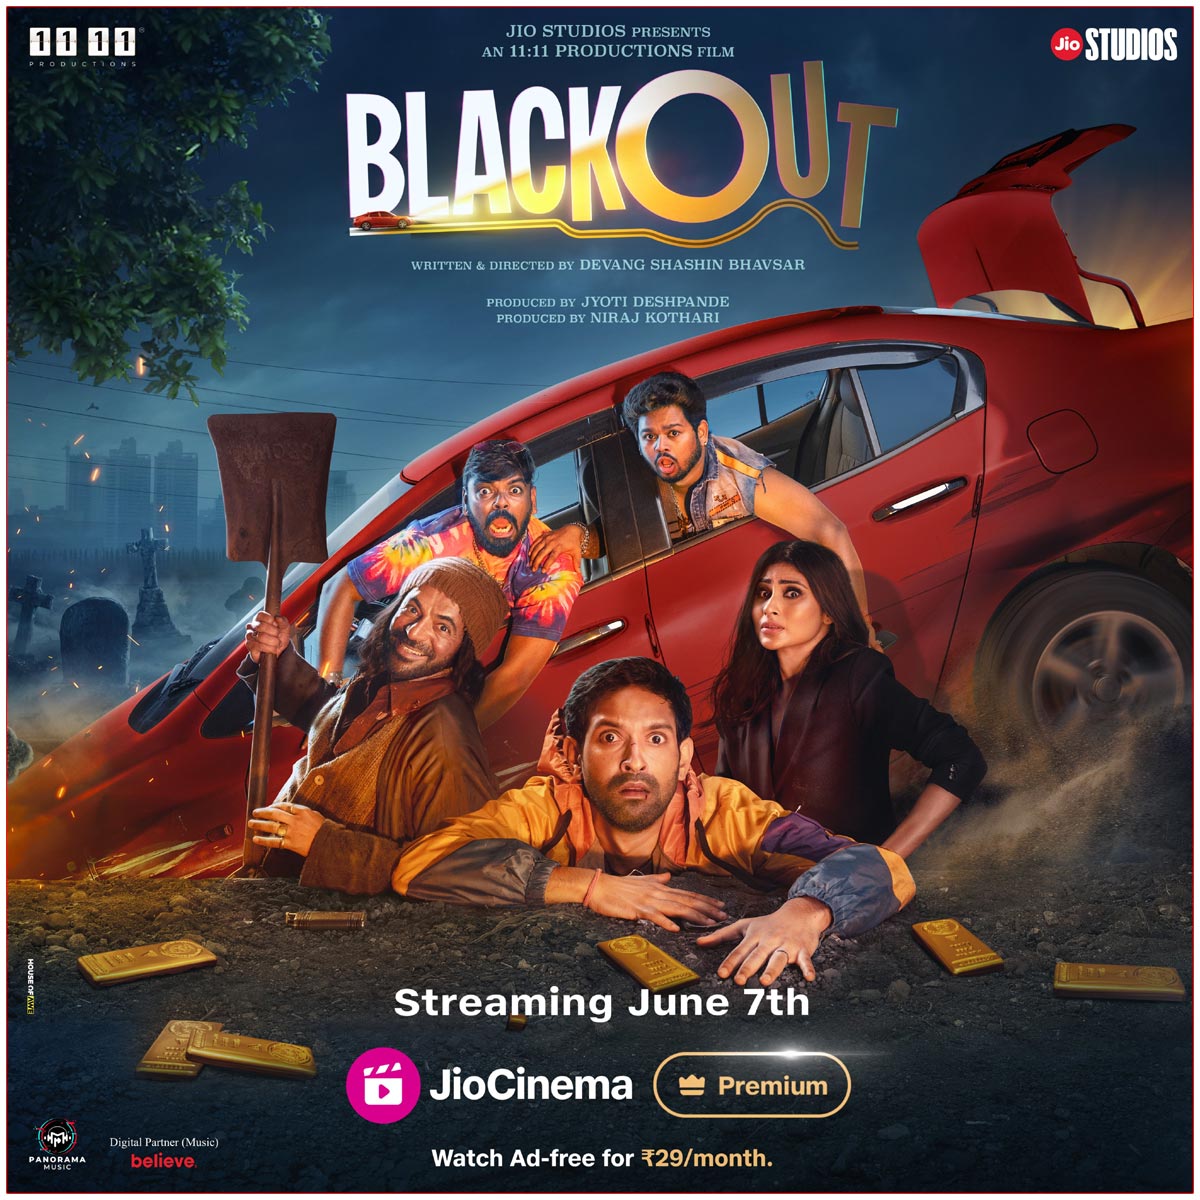 Vikrant Massey Blackout  streaming from 7th June in jio cinema